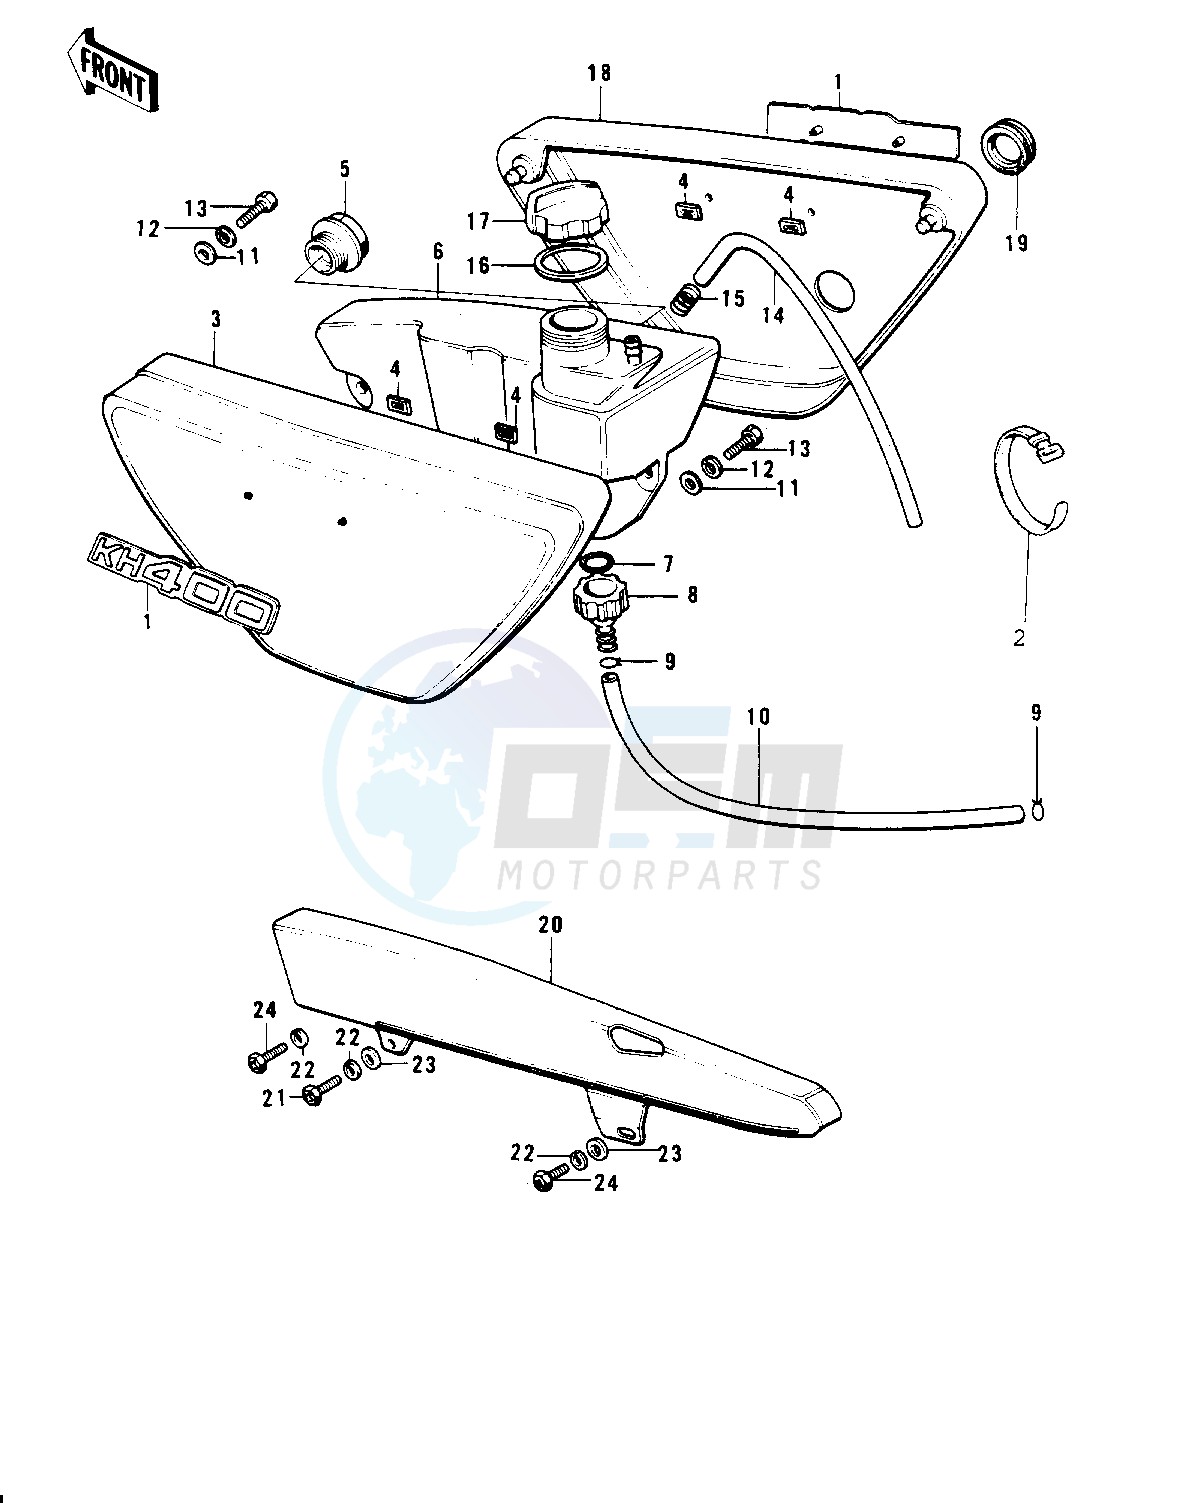 SIDE COVERS_OIL TANK_CHAIN COVER blueprint